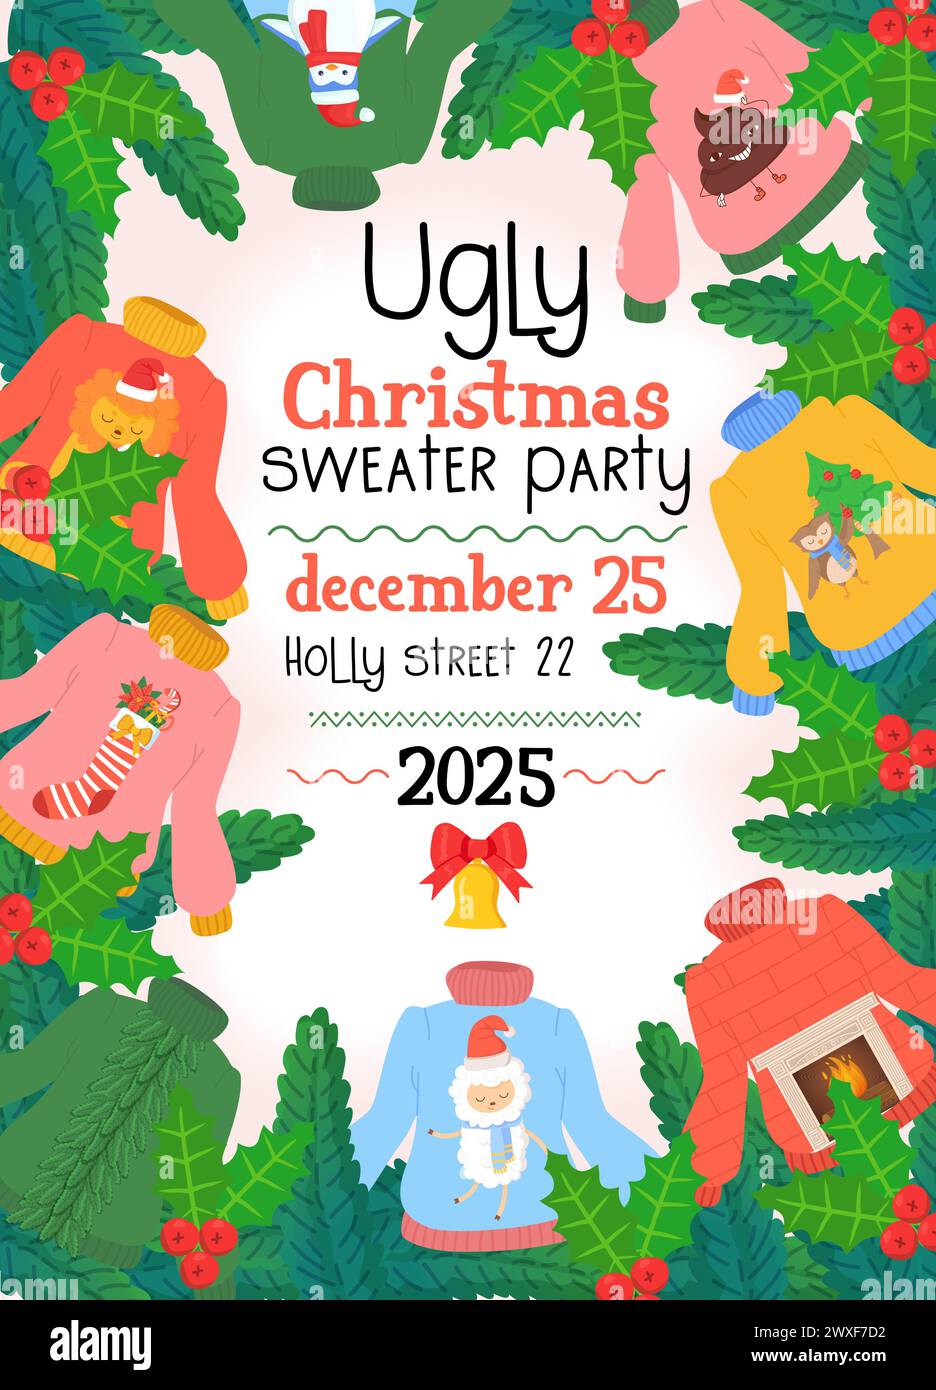 ugly sweater party invitation. Christmas winter sweaters with ridiculos design, DIY vibe. Stock Vector